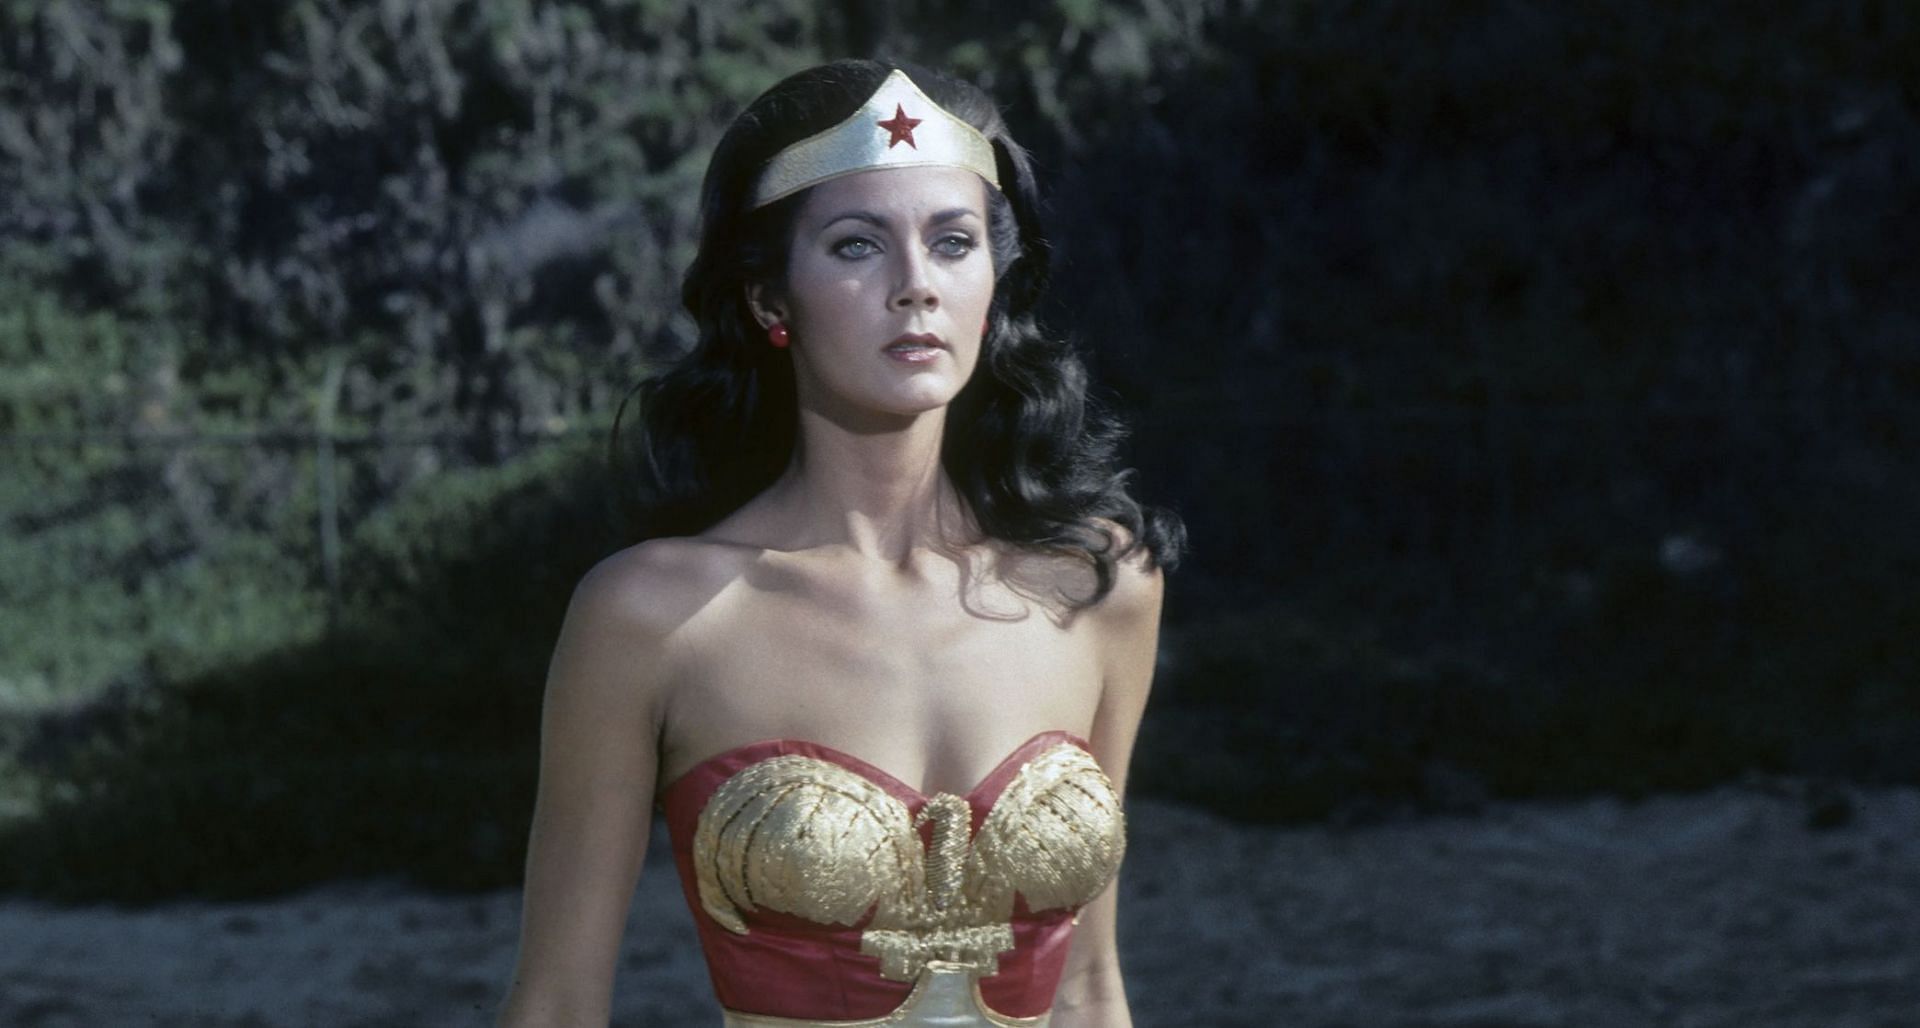 Lynda Carter&#039;s iconic portrayal in the 1970s helped cement Wonder Woman&#039;s place in popular culture, inspiring a generation of young girls (Image via Warner Bros. Television)